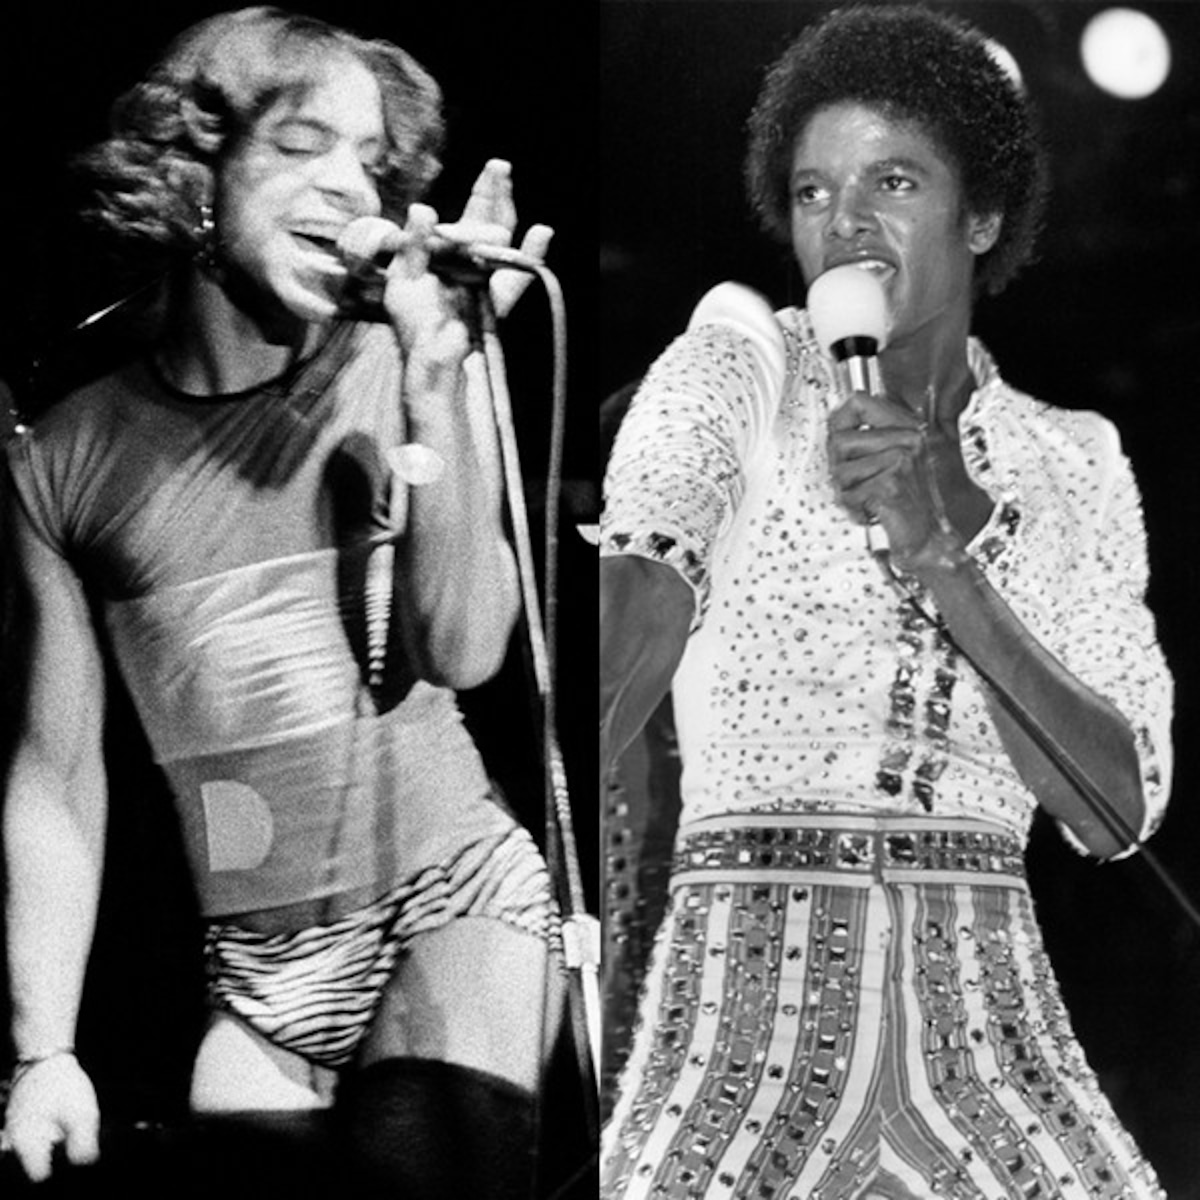 Michael vs Prince in the 80s was one of the greatest musical